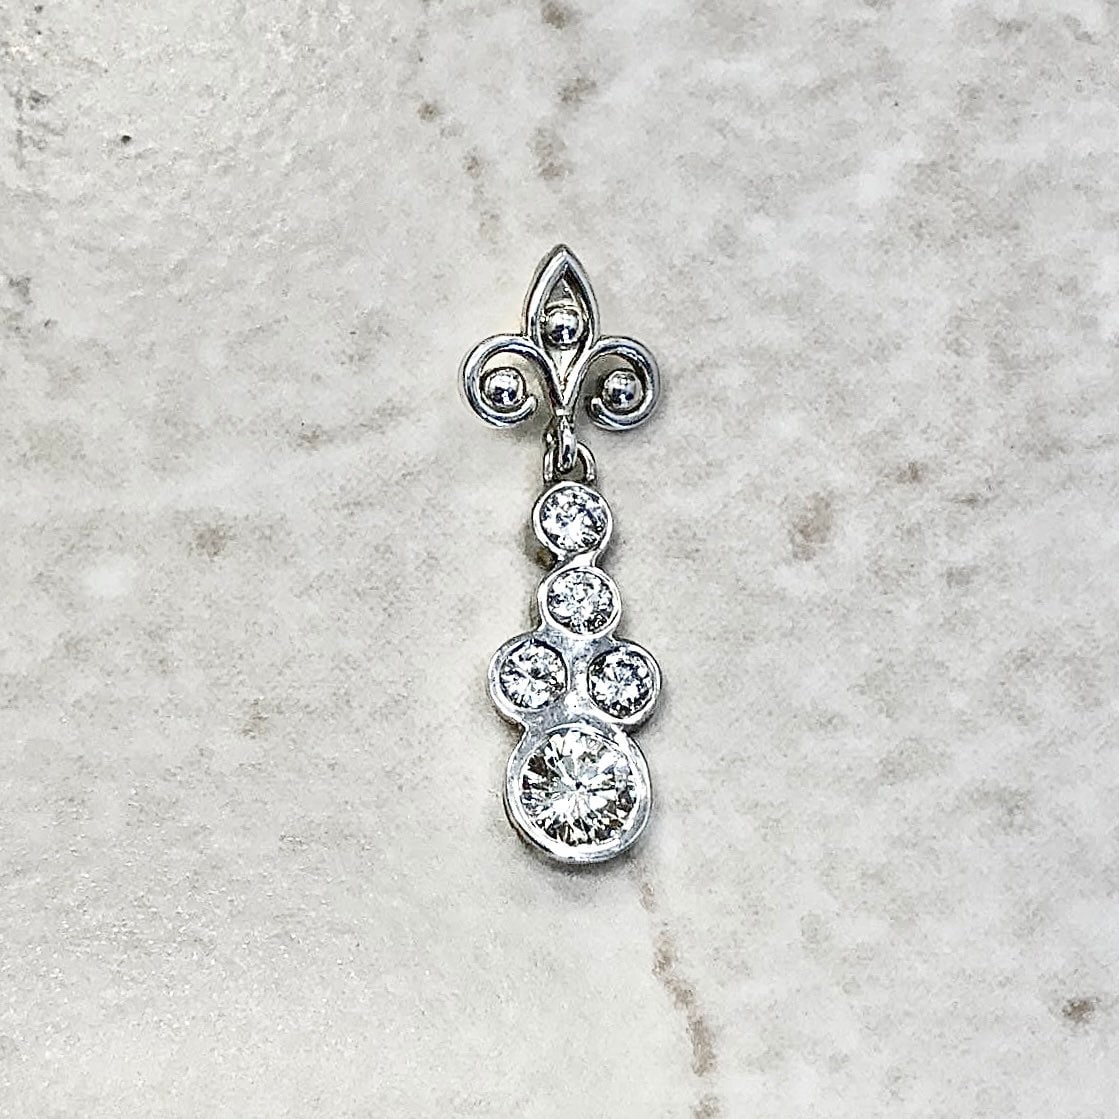 14K Vintage Diamond Pendant Necklace - White Gold Pendant - Diamond Necklace - Vintage Pendant - Fleur De Lis Pendant - Best Gifts For Her